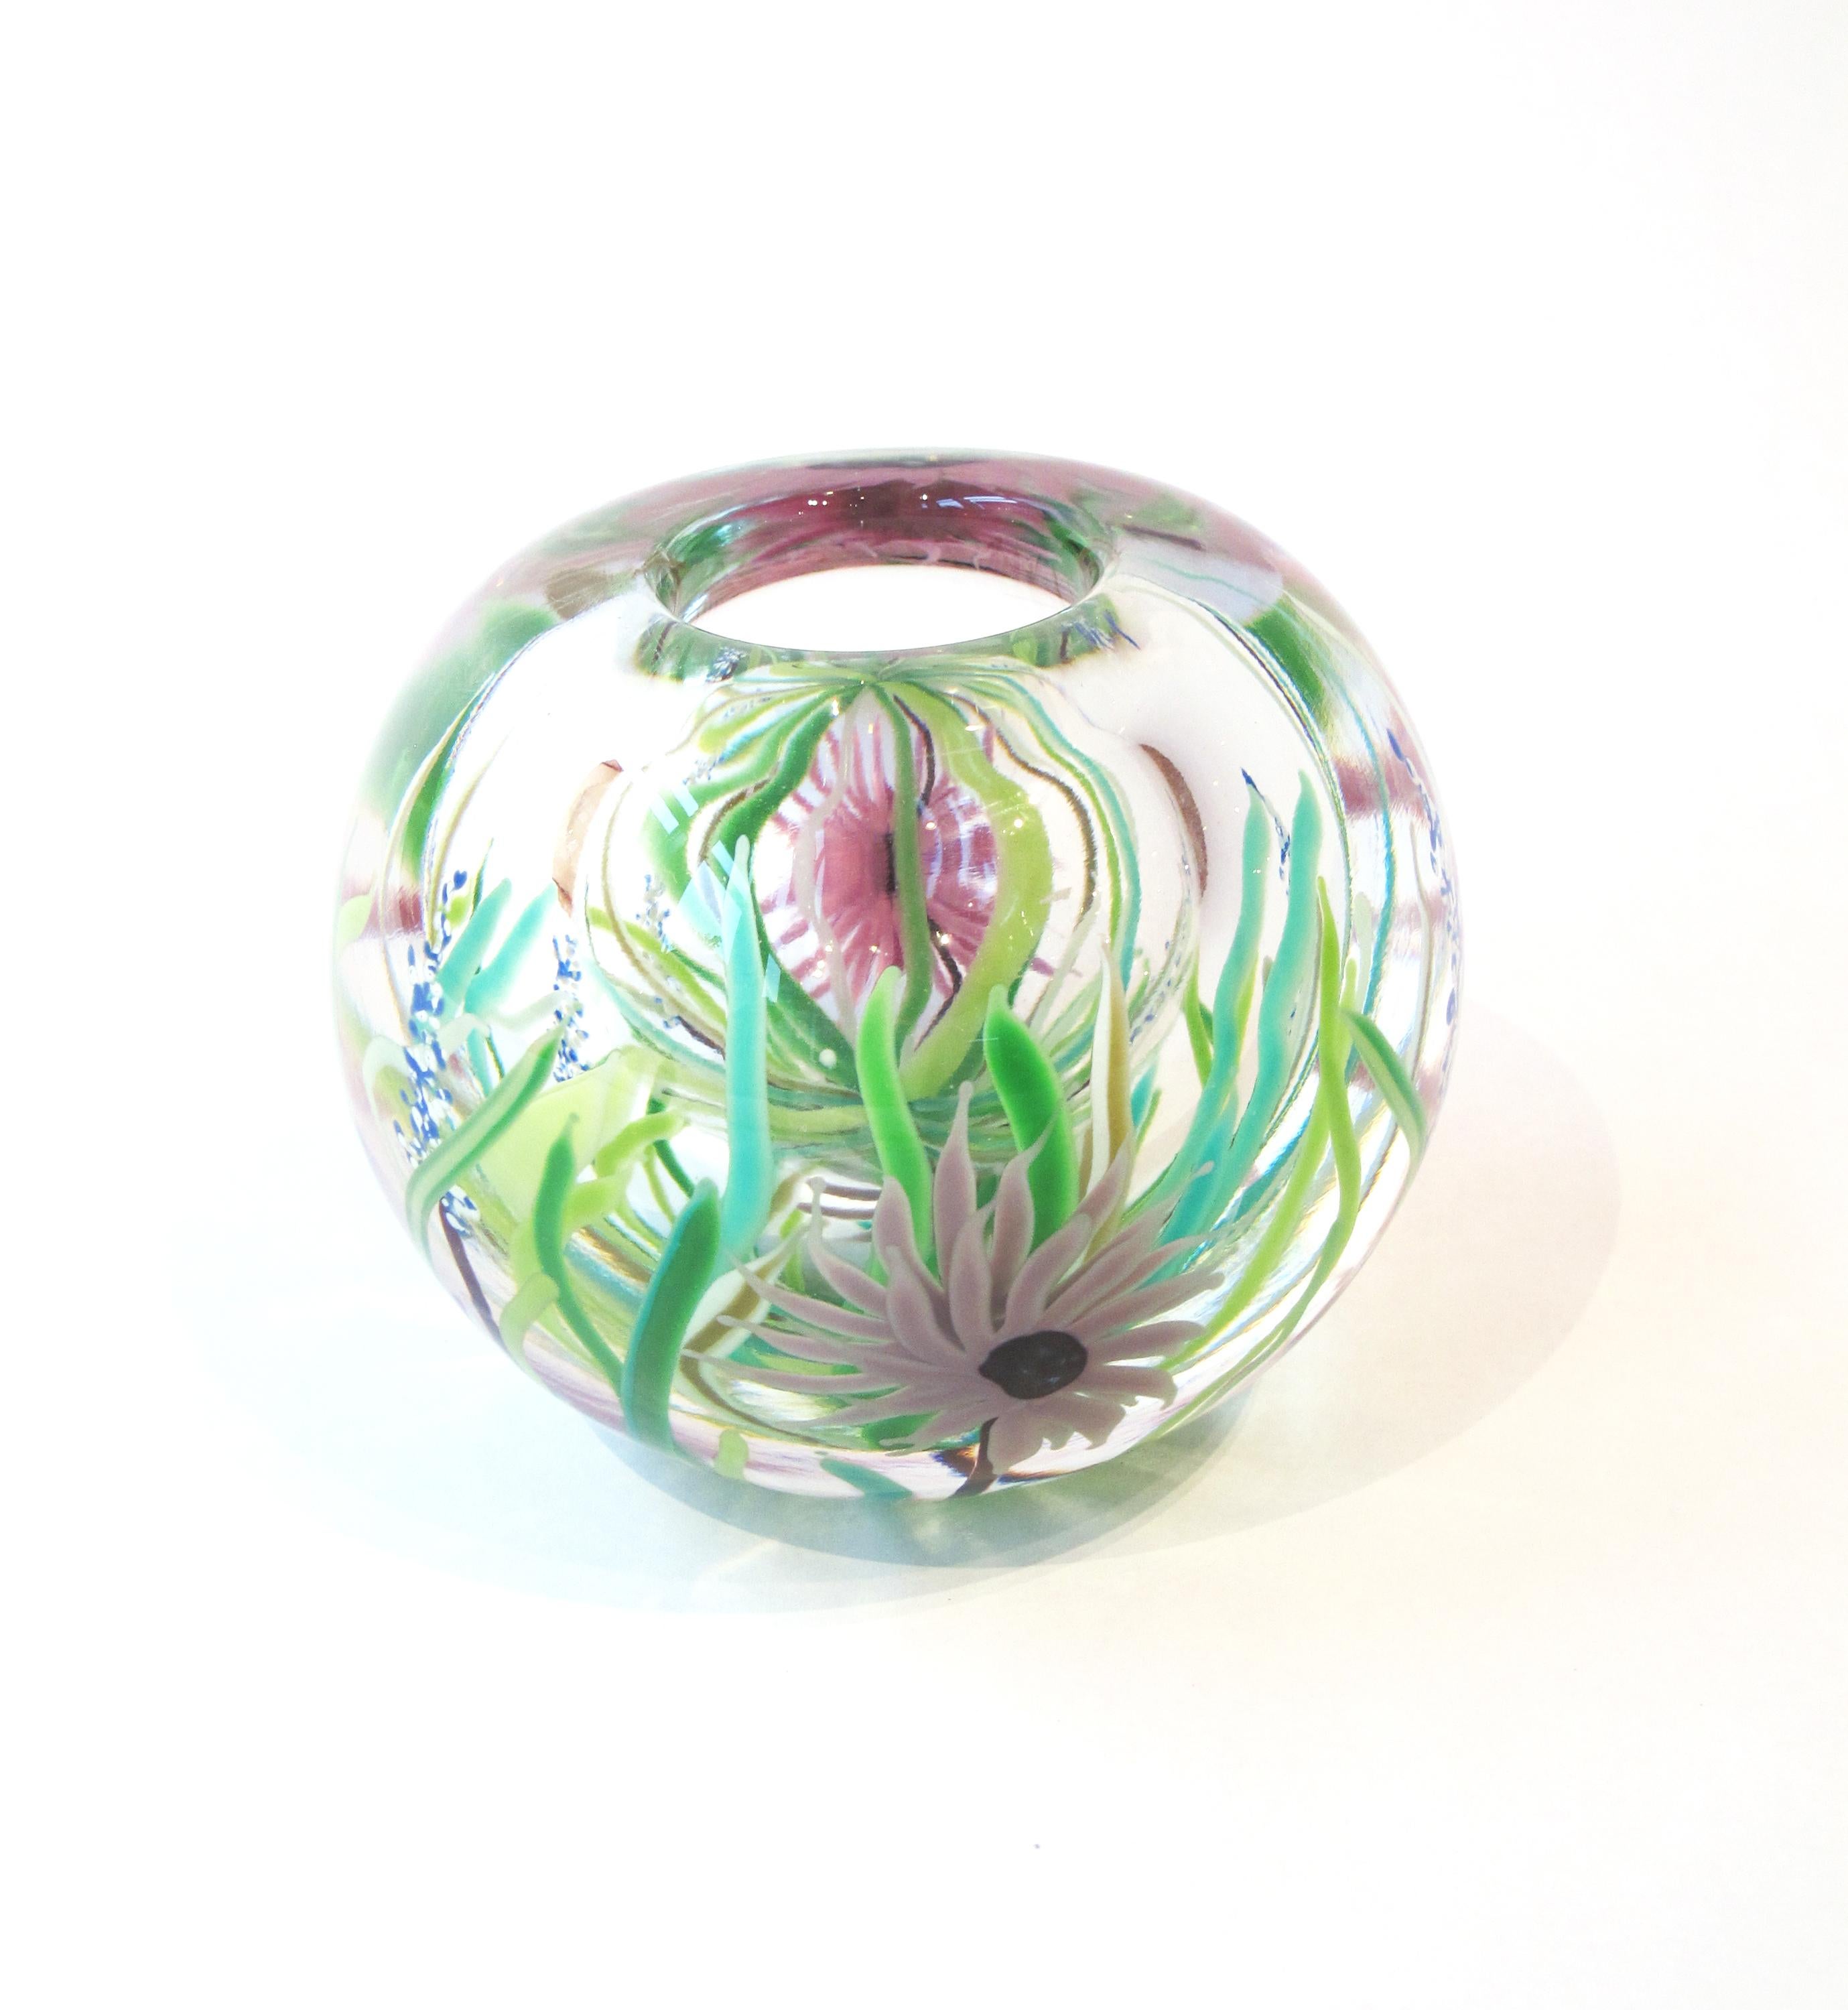 American Blown Glass Paperweight Vase by David R. Huchthausen, 1980 For Sale